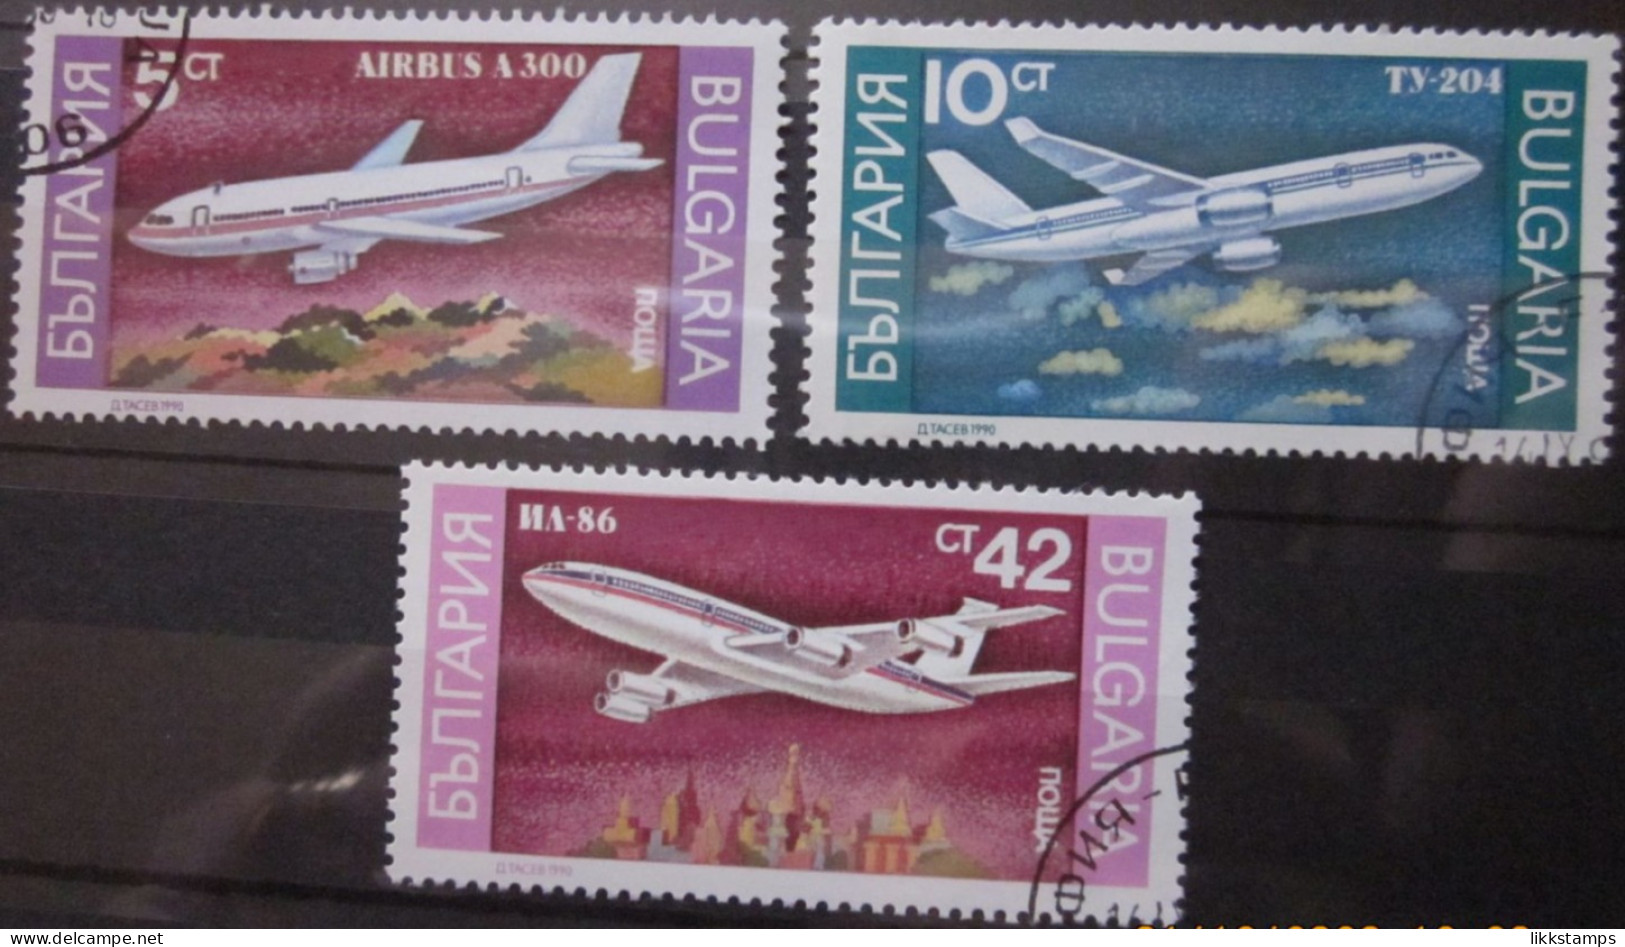 BULGARIA 1990 ~ S.G. 3705, 3706 & 3709, ~ AIRCRAFT. ~  VFU #02960 - Used Stamps